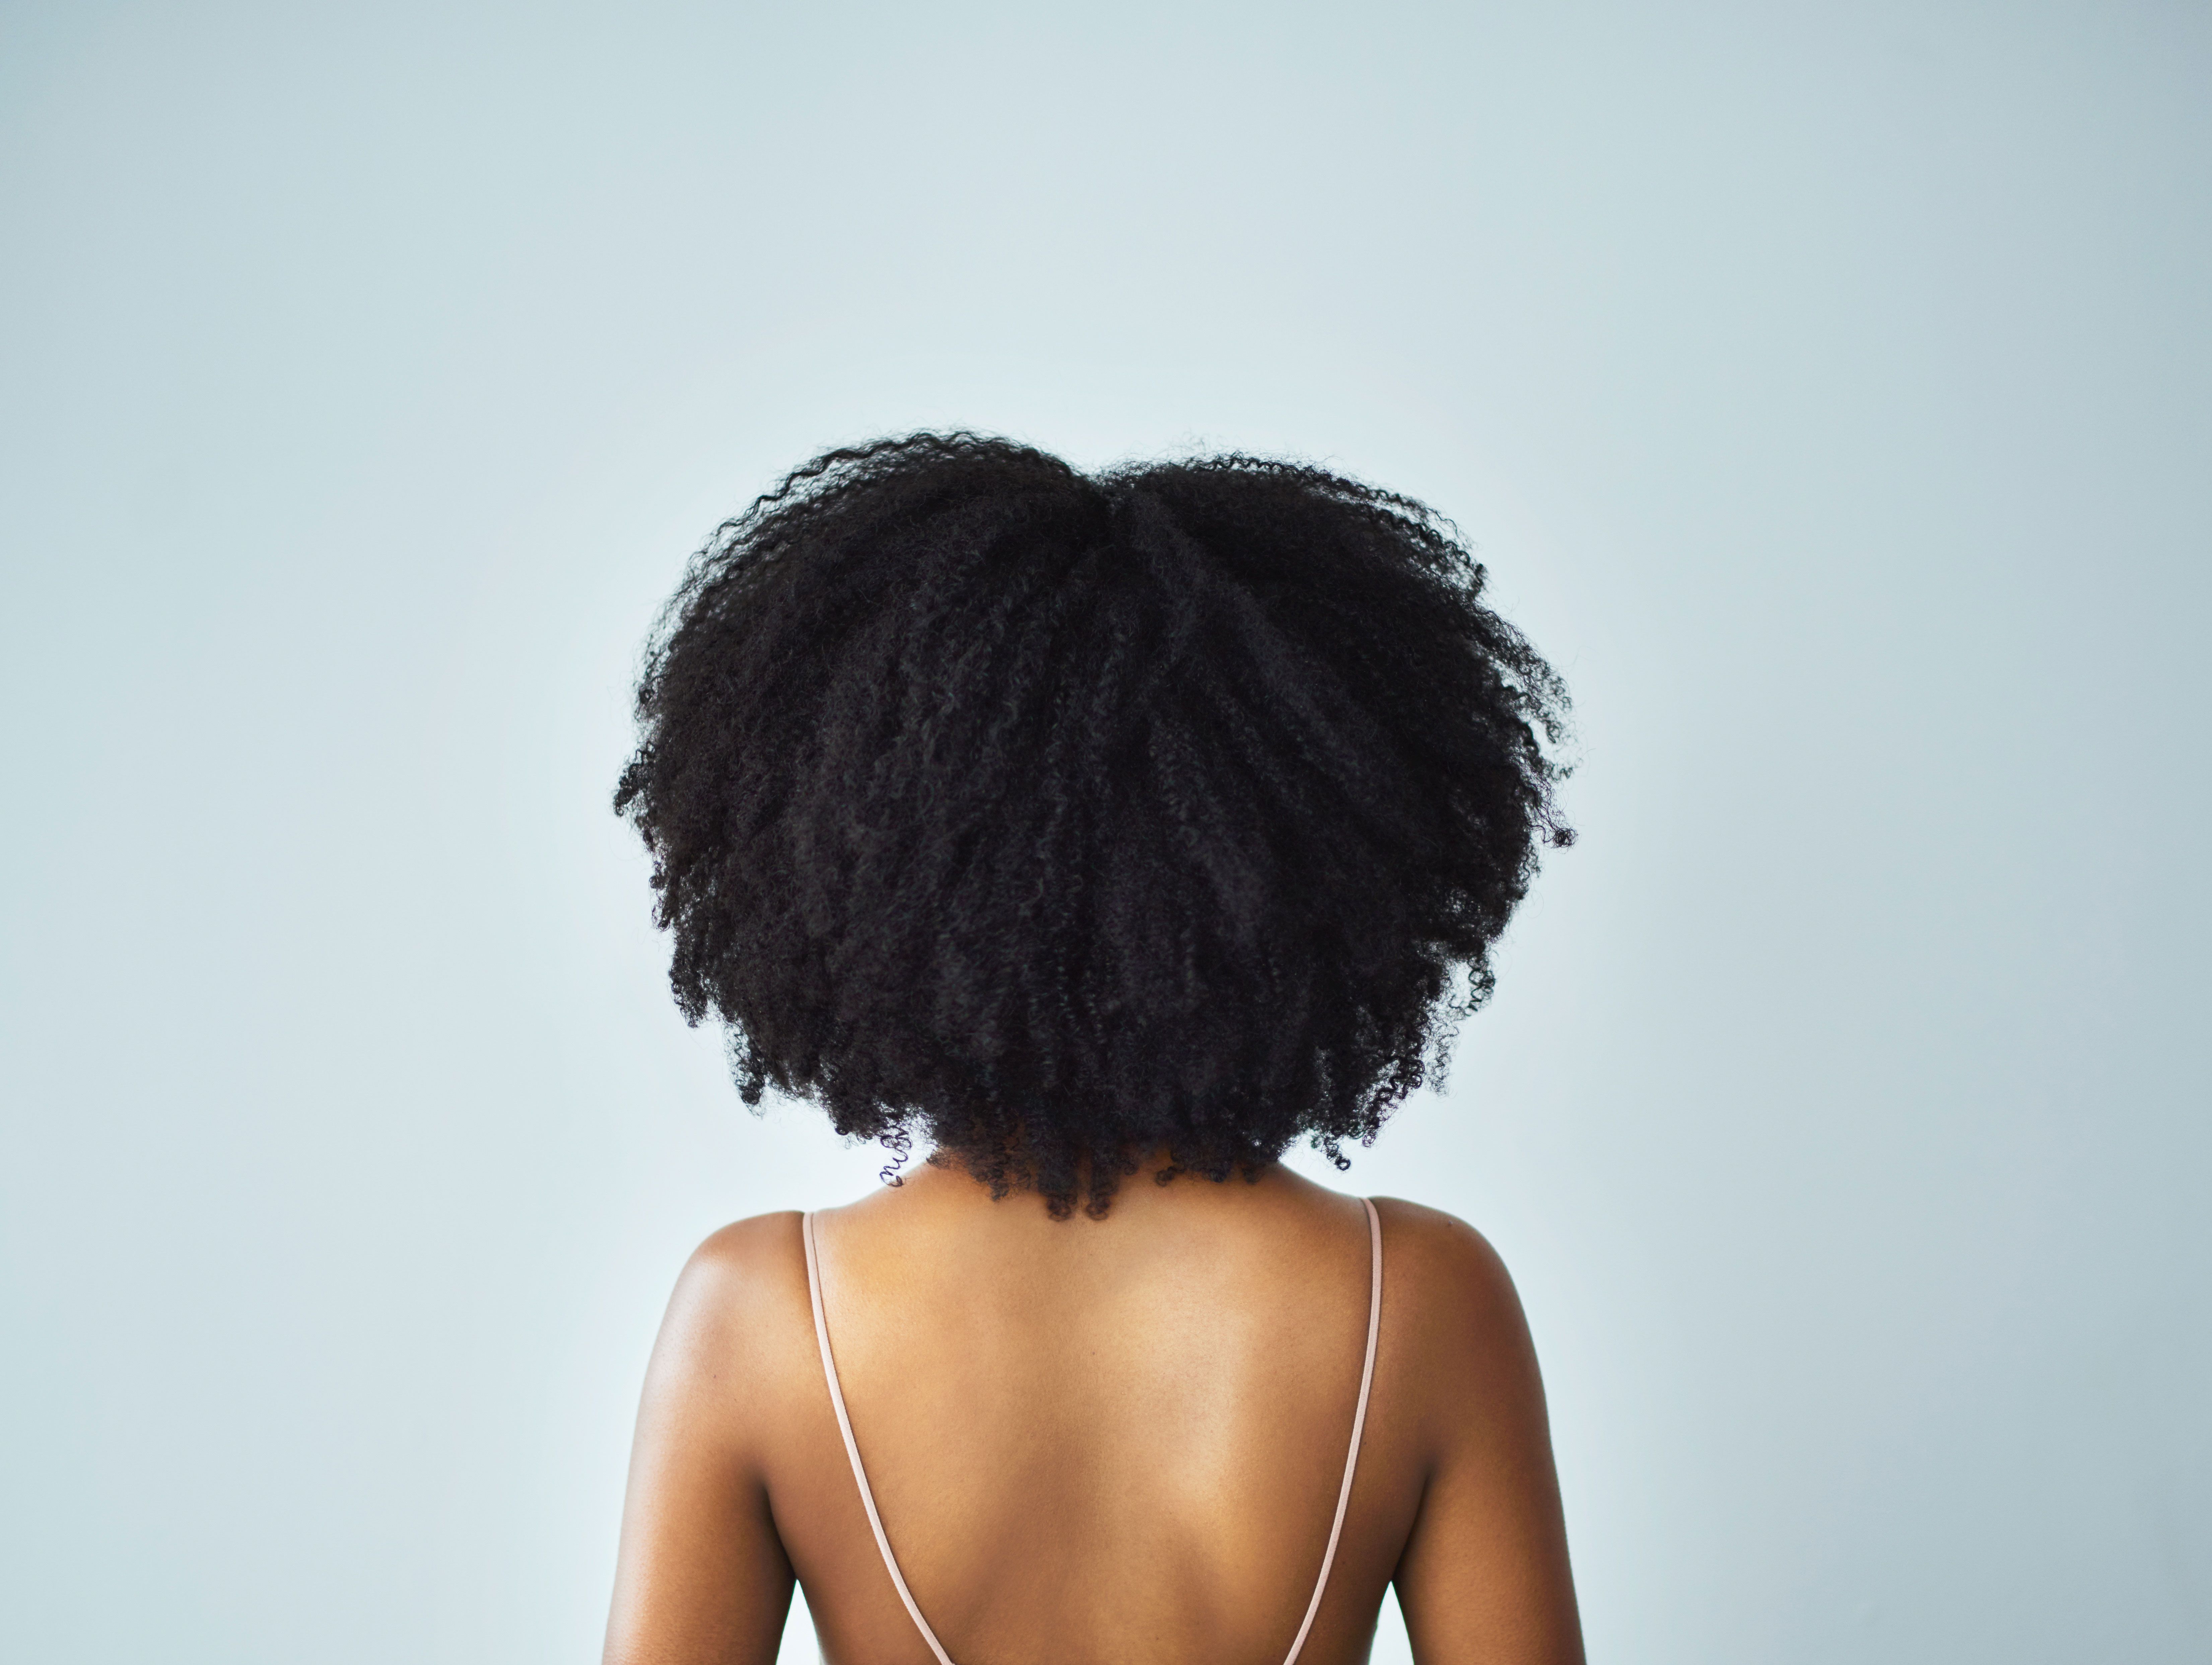 Now Is The Time To Get to Know Your Natural Hair